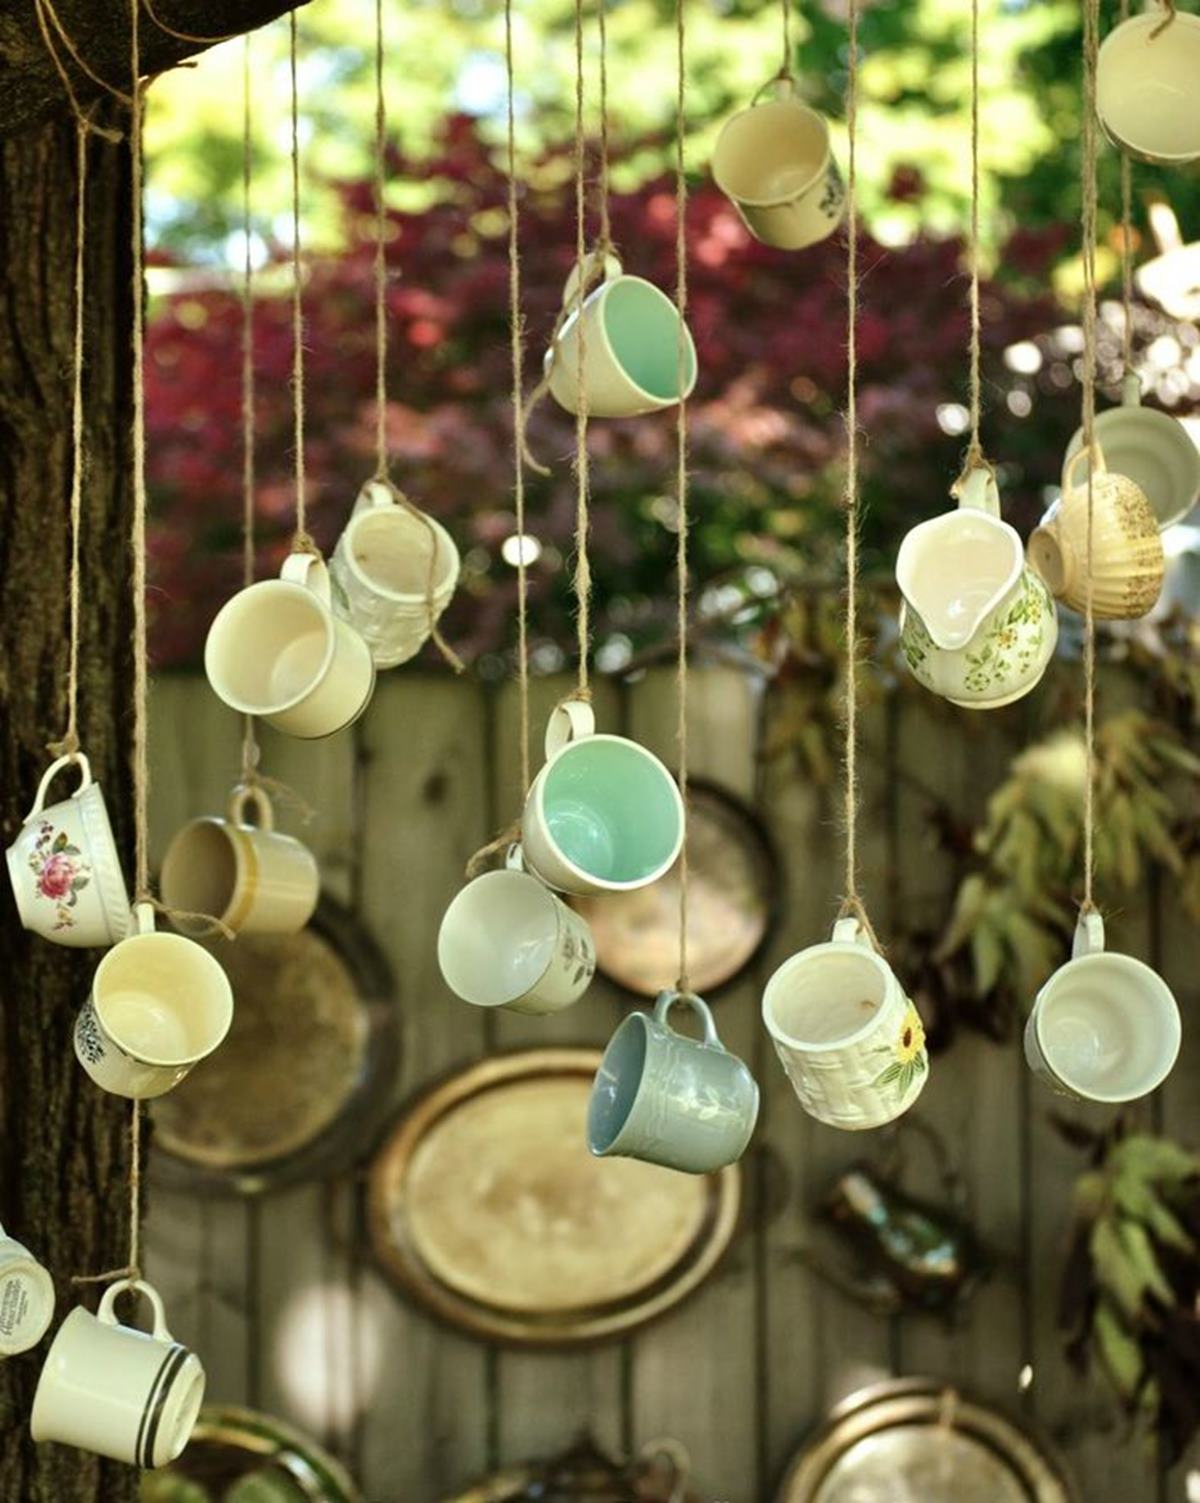 The Secrets Behind a Beautifully Done Vintage Garden Decor 5